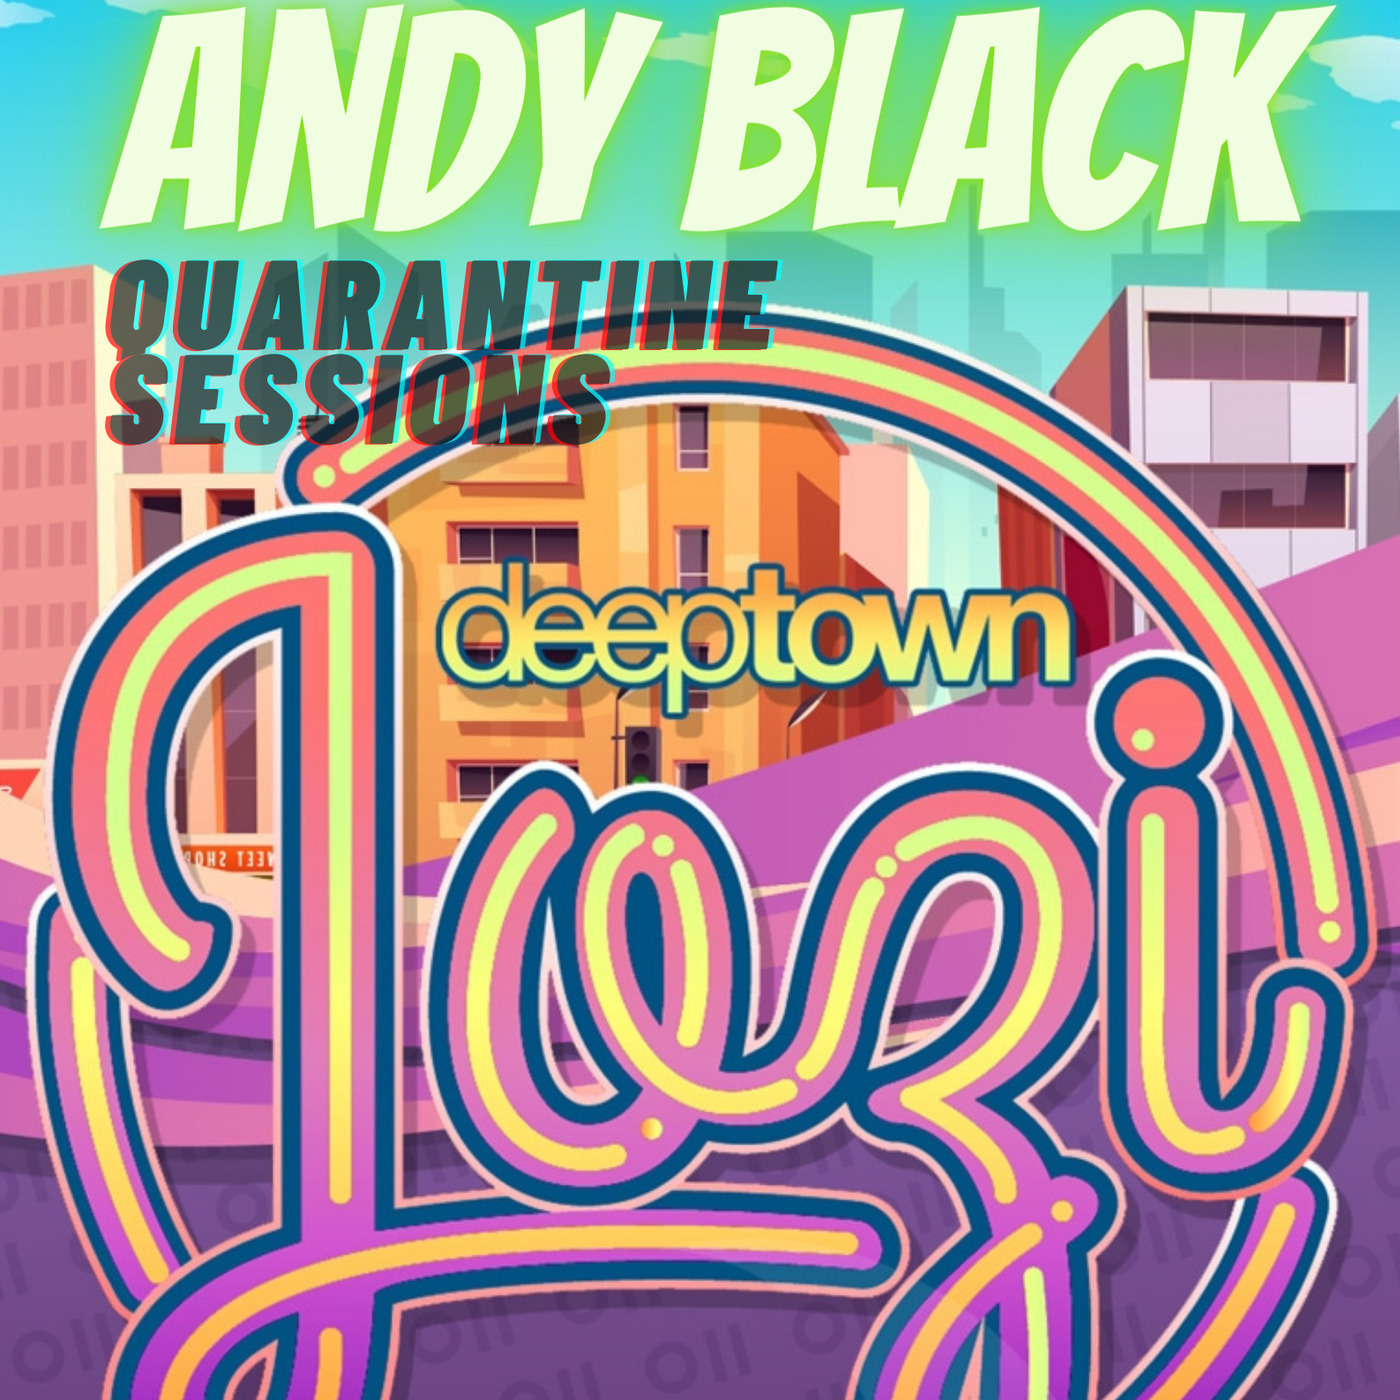 Andy Black #QuarantineSessions - Deep House (Deep Town Jozi Editio) Episode 71